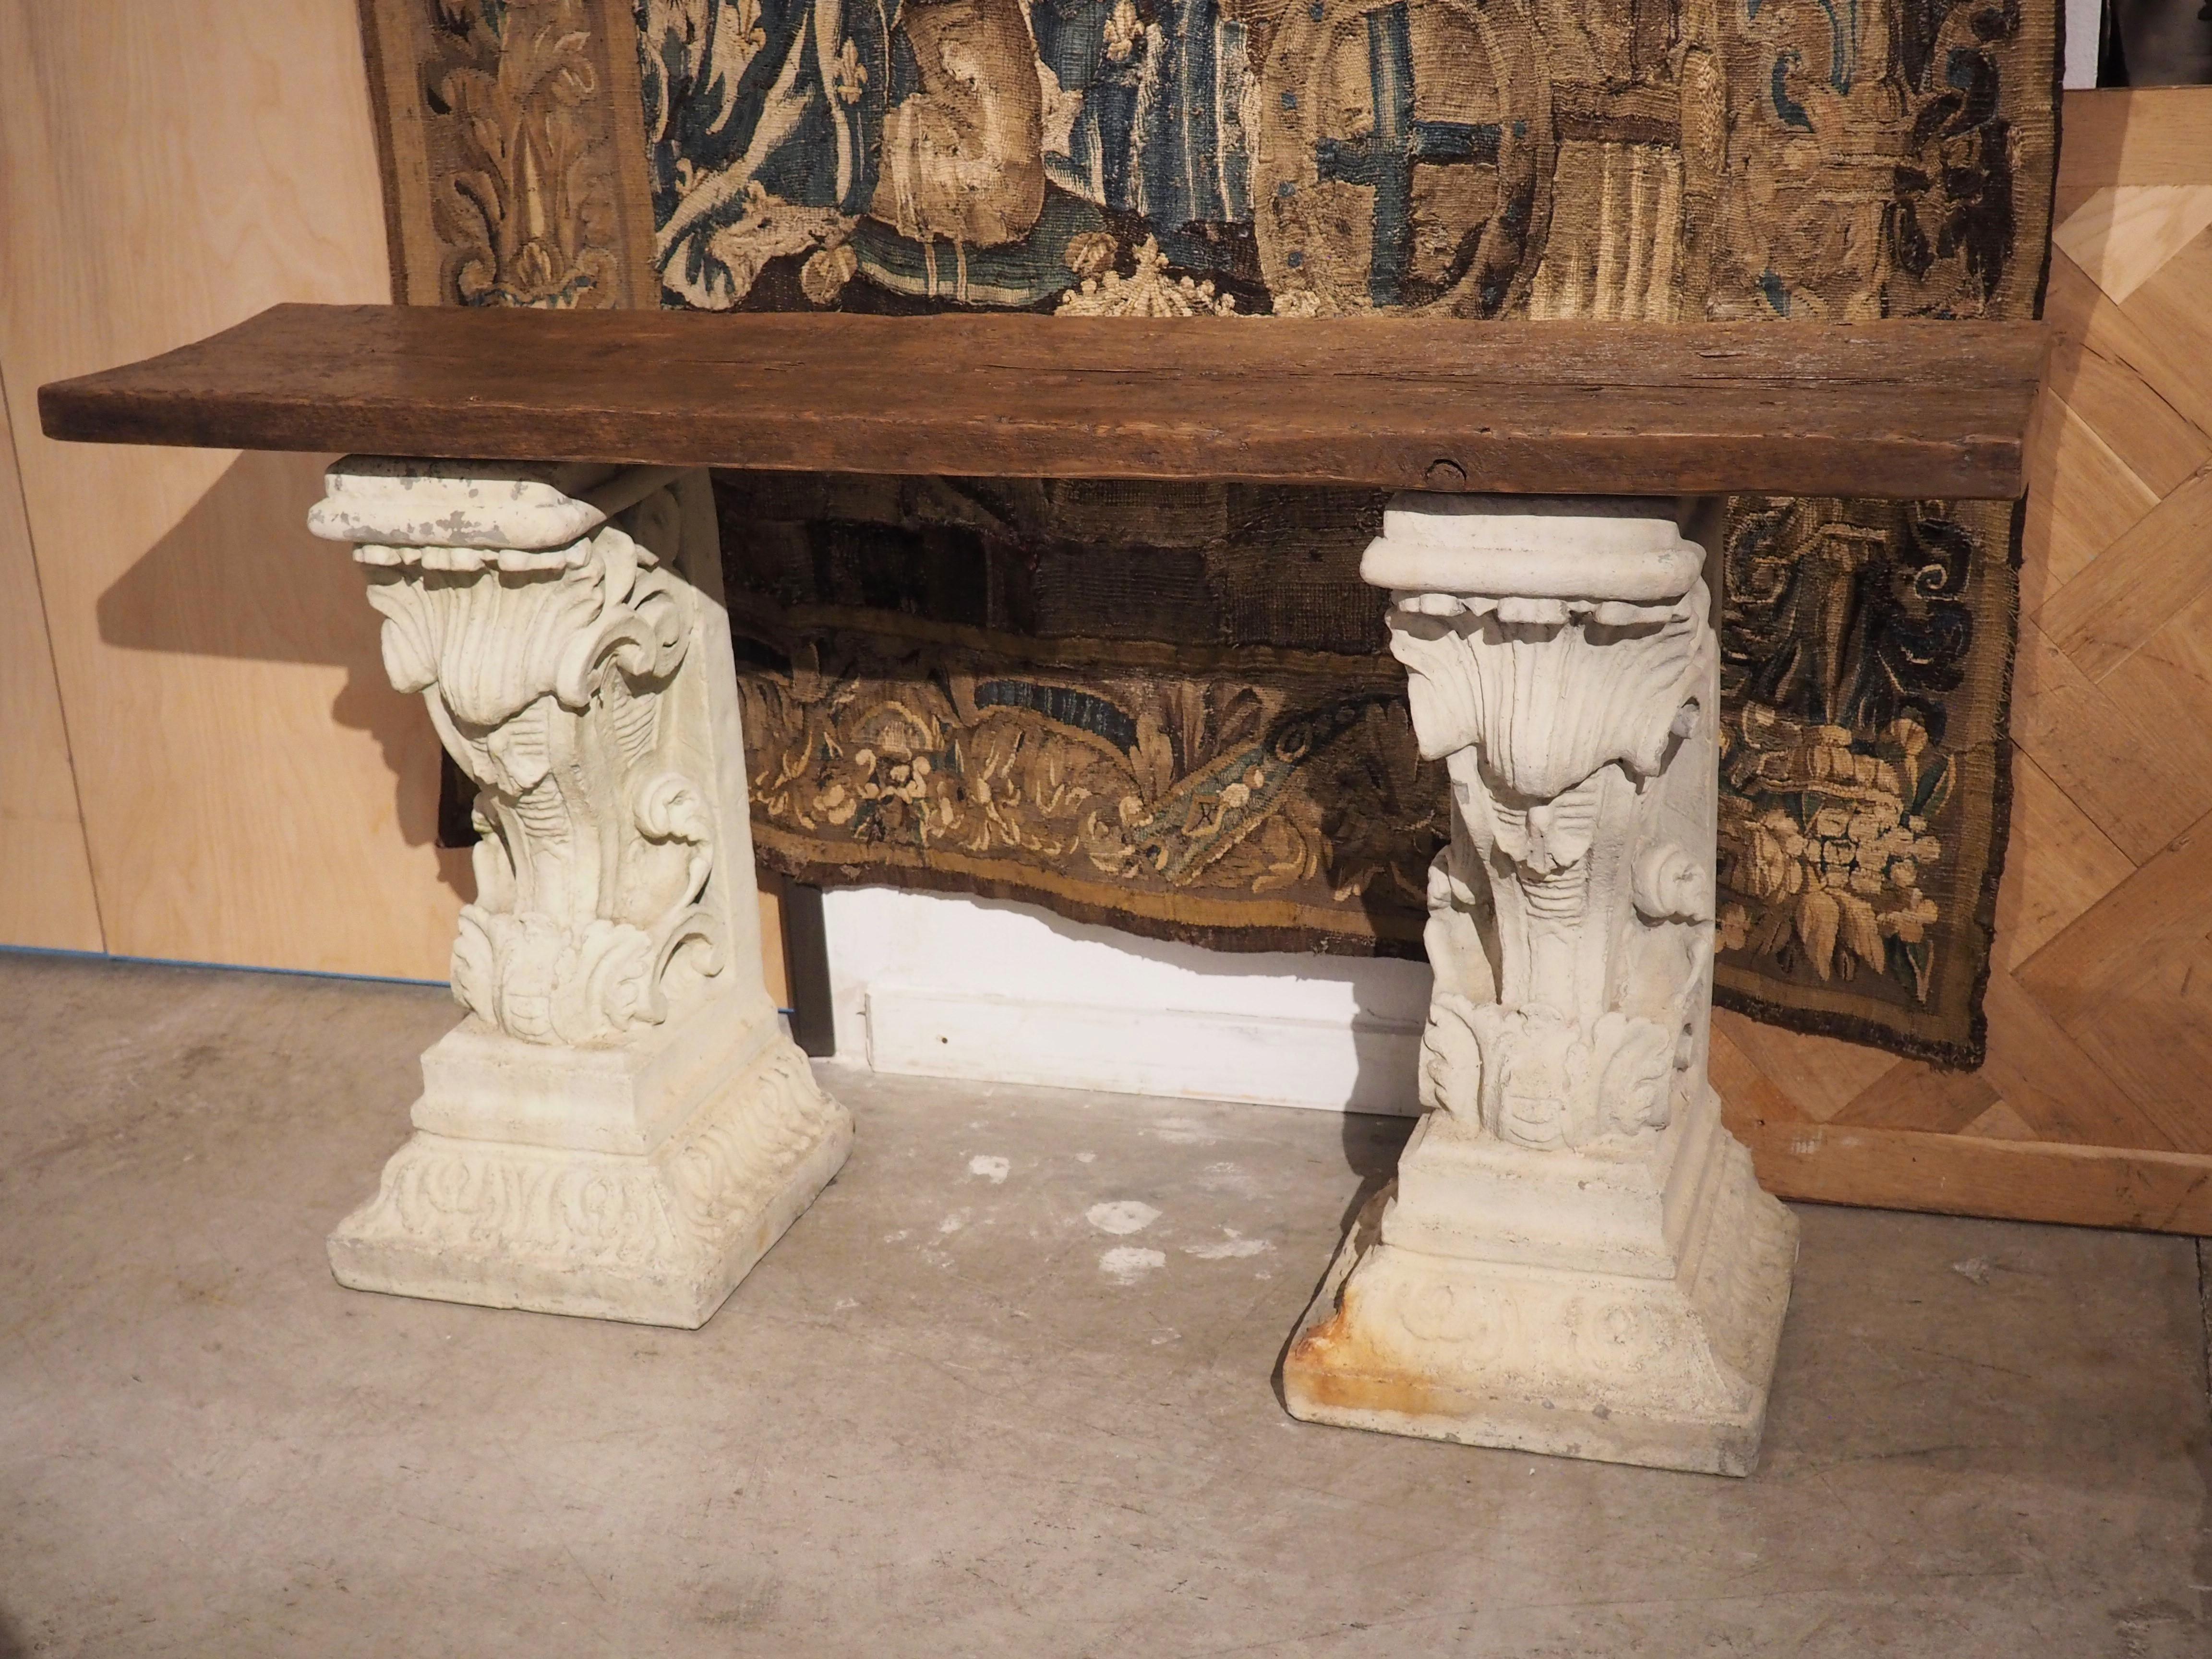 A pair of cement corbels cast in France in the 1900’s forms a highly decorative base for this console table with antique plank top. The two-inch-thick top is made of pine wood that was felled in the 1800’s, which explains the visible cupping that